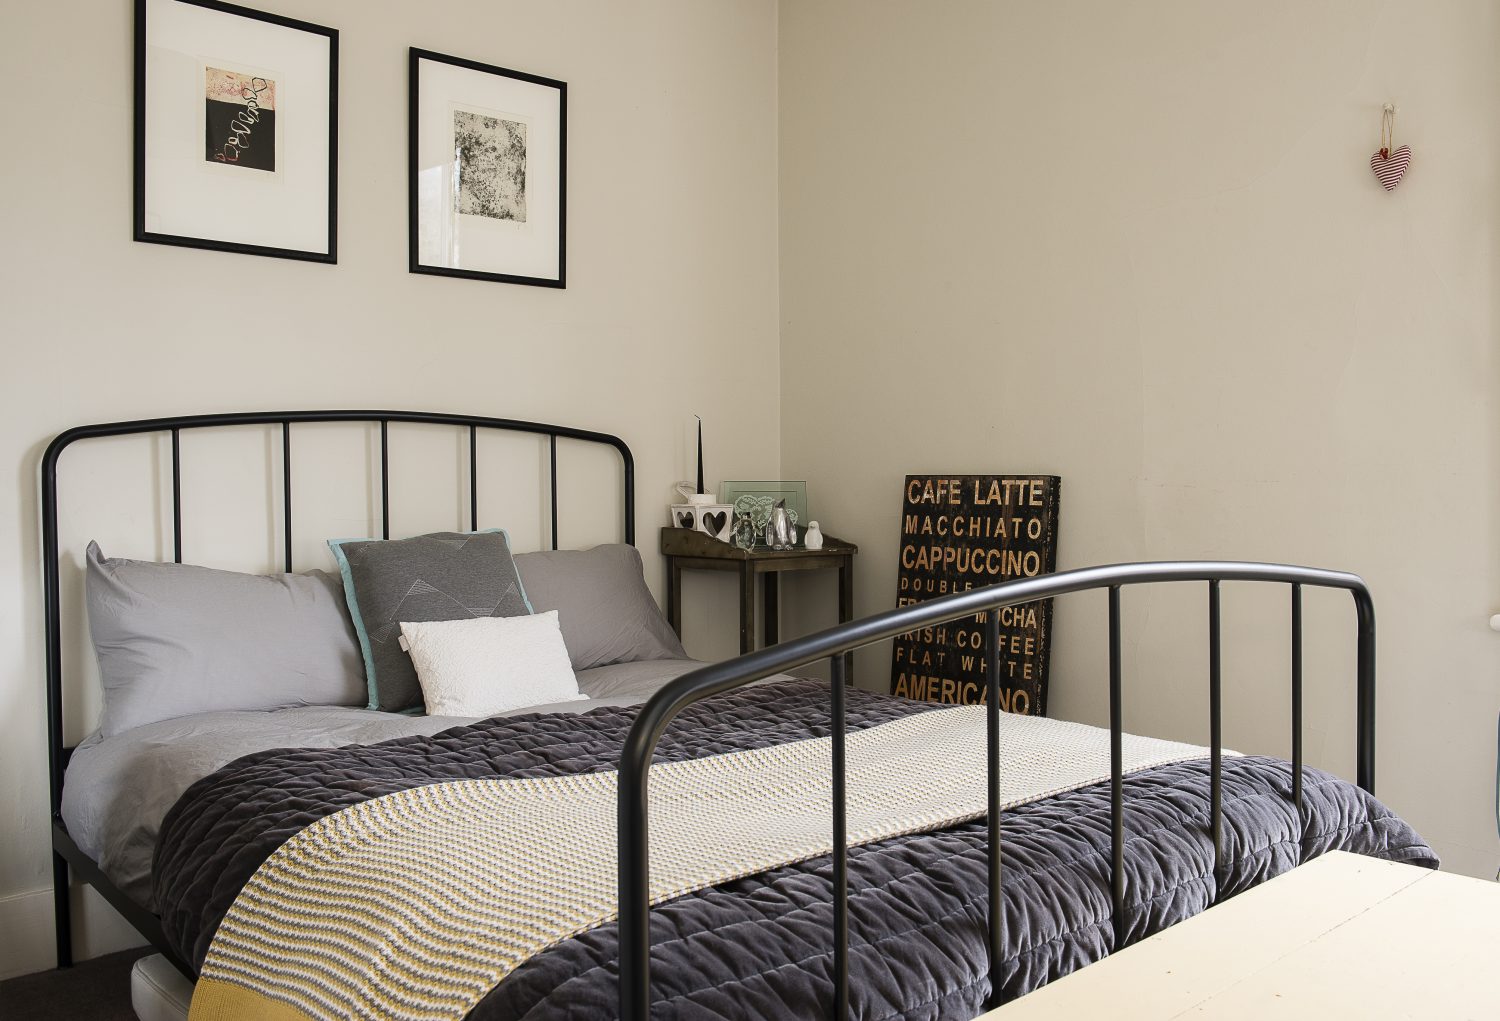 The guest bedroom features a metal bed frame from Made.com